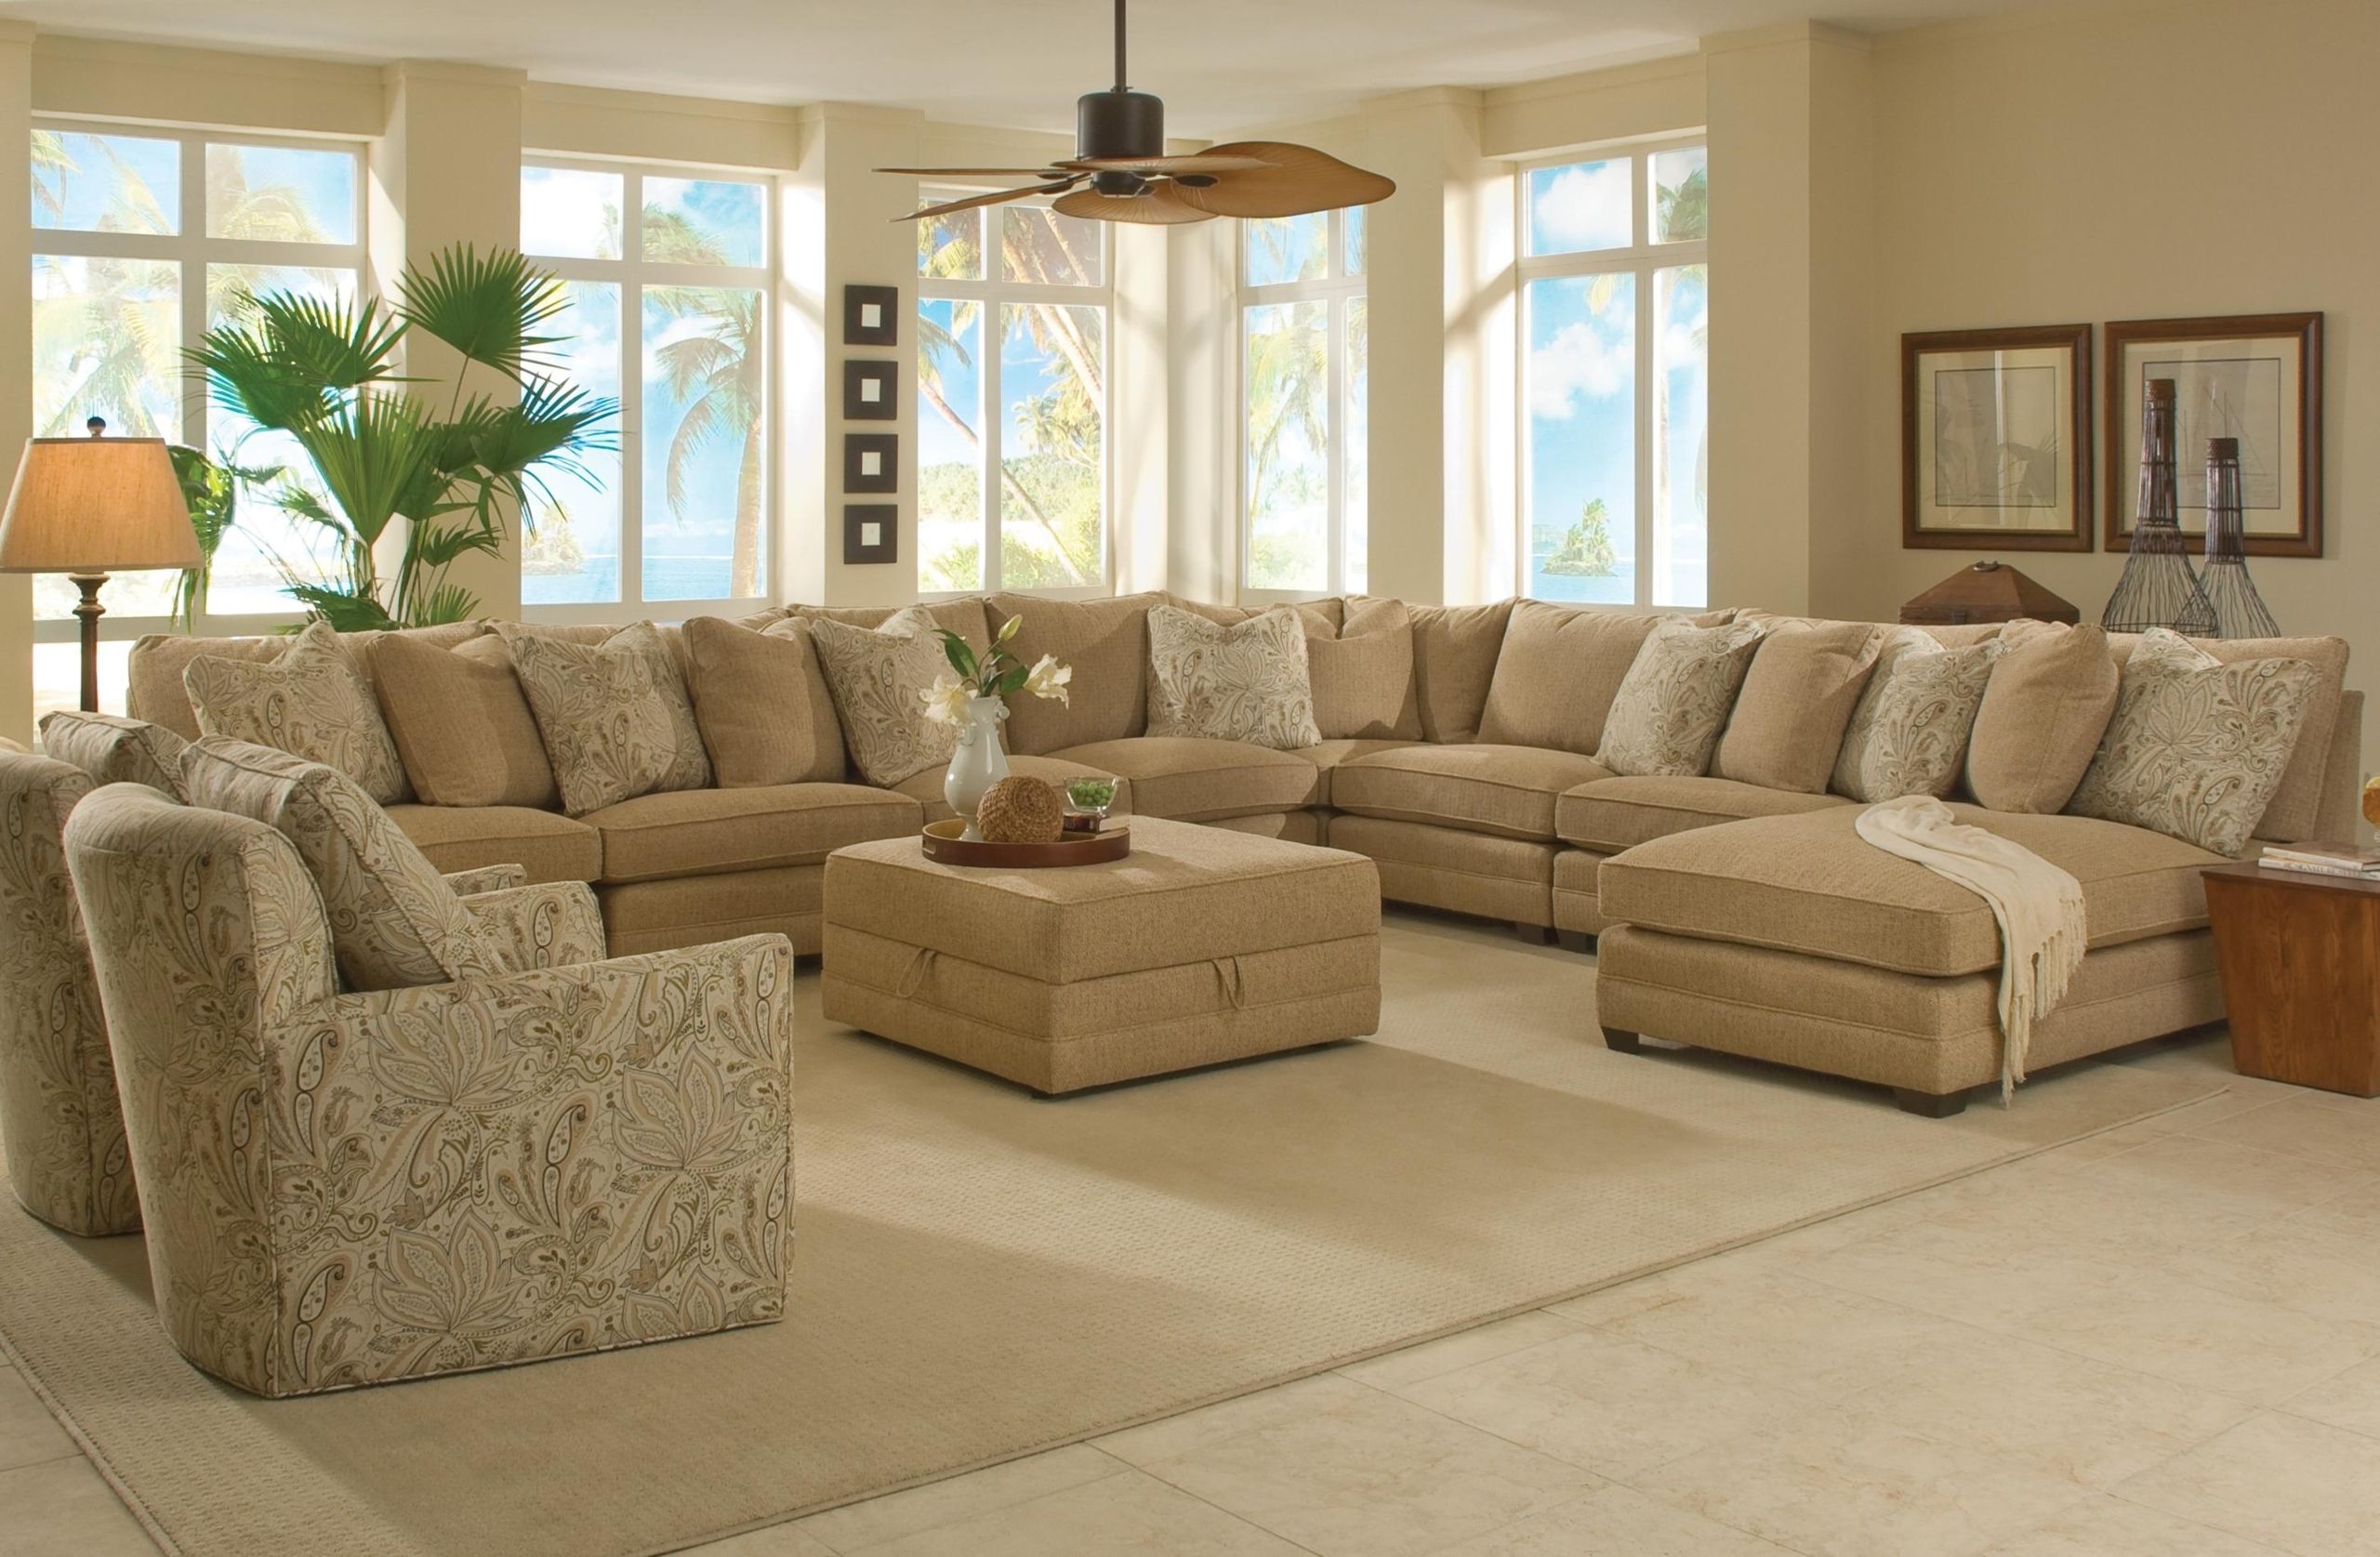 Ella Home Ideas: Plush Extra Large Sectional Sofa : Best And Most For 110" Oversized Sofas (View 10 of 15)